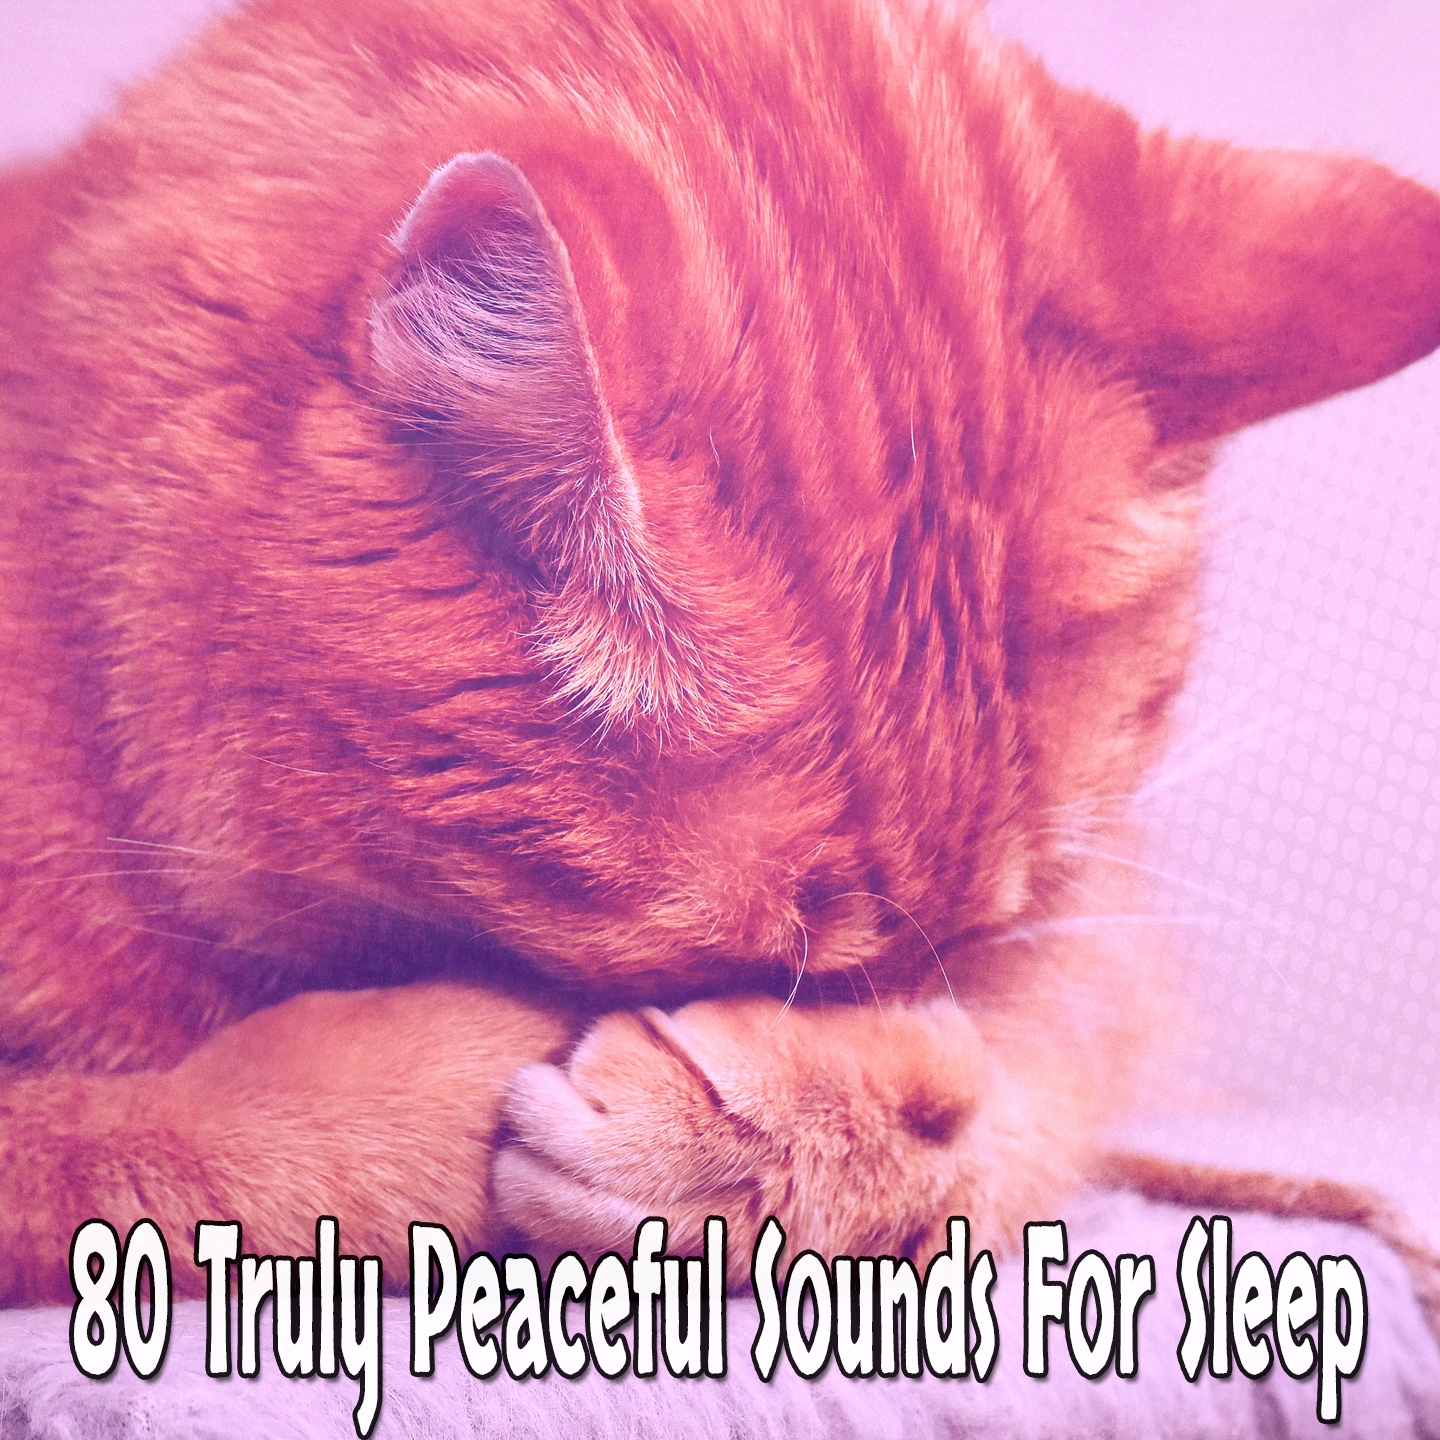 80 Truly Peaceful Sounds For Sleep